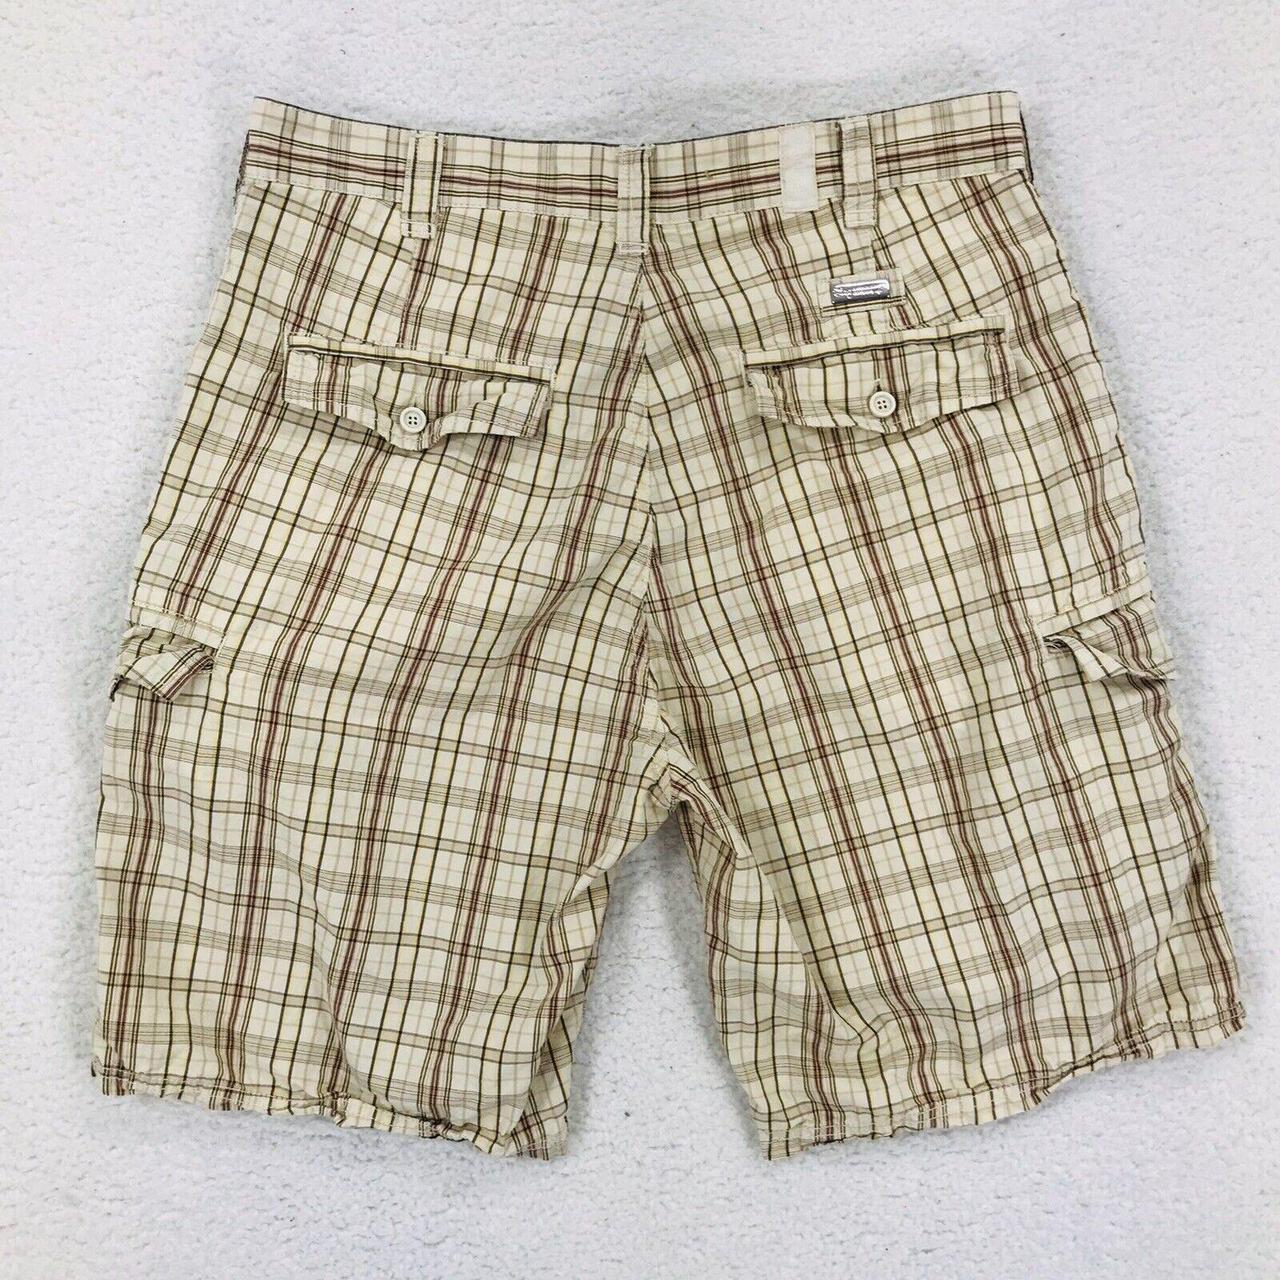 Lifted Research Group LRG Mens Cargo Shorts 34 Appx... - Depop